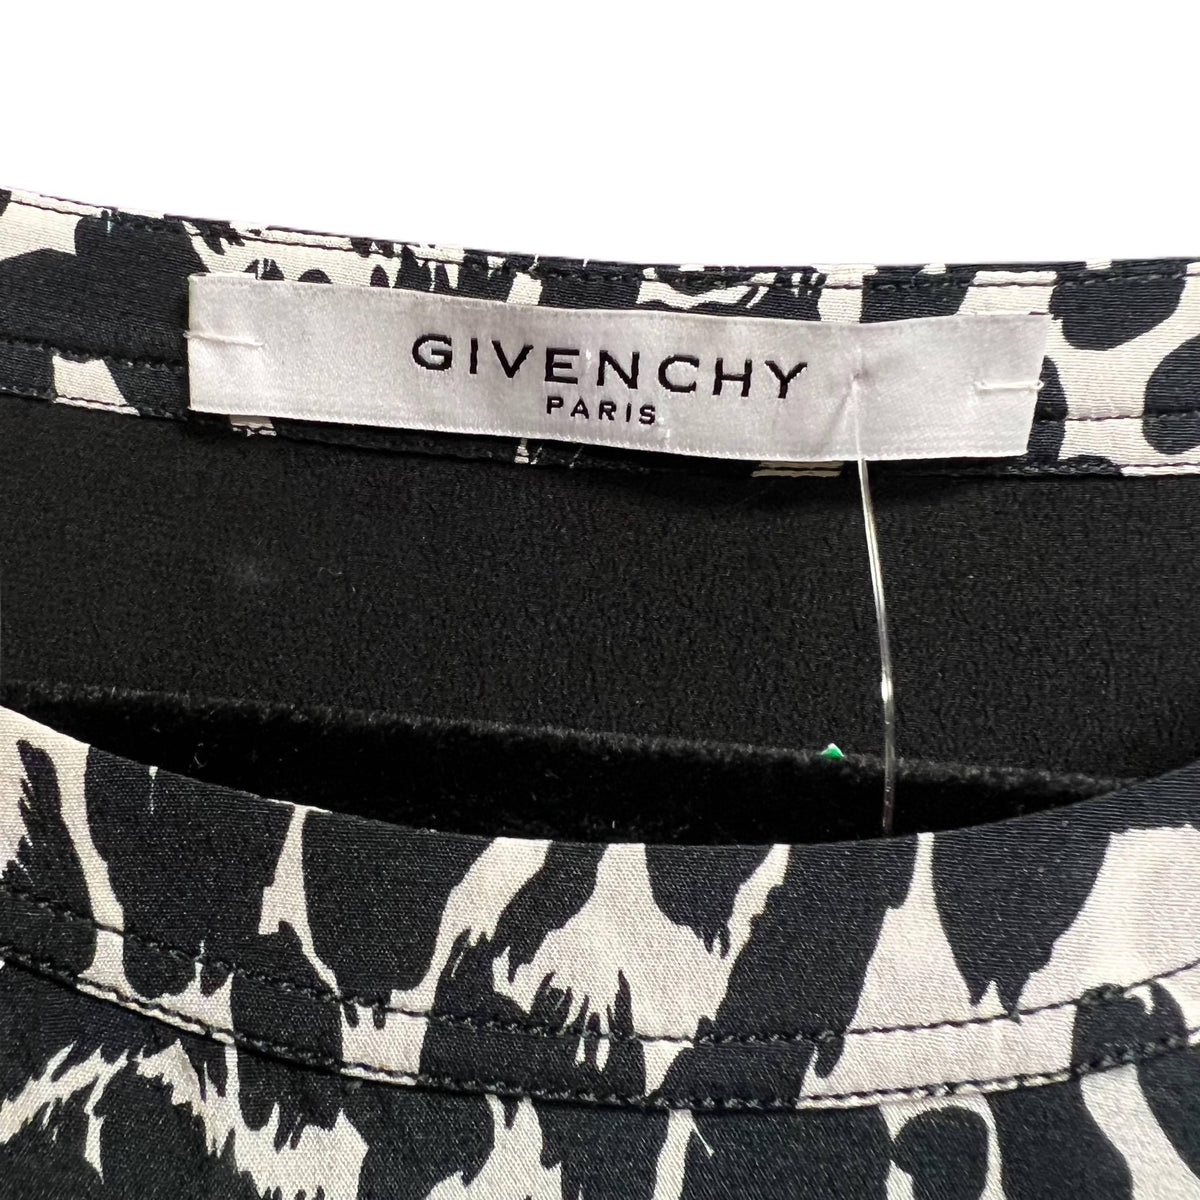 Pre-Owned GIVENCHY Black and White Oval Print Top | Size L - theREMODA